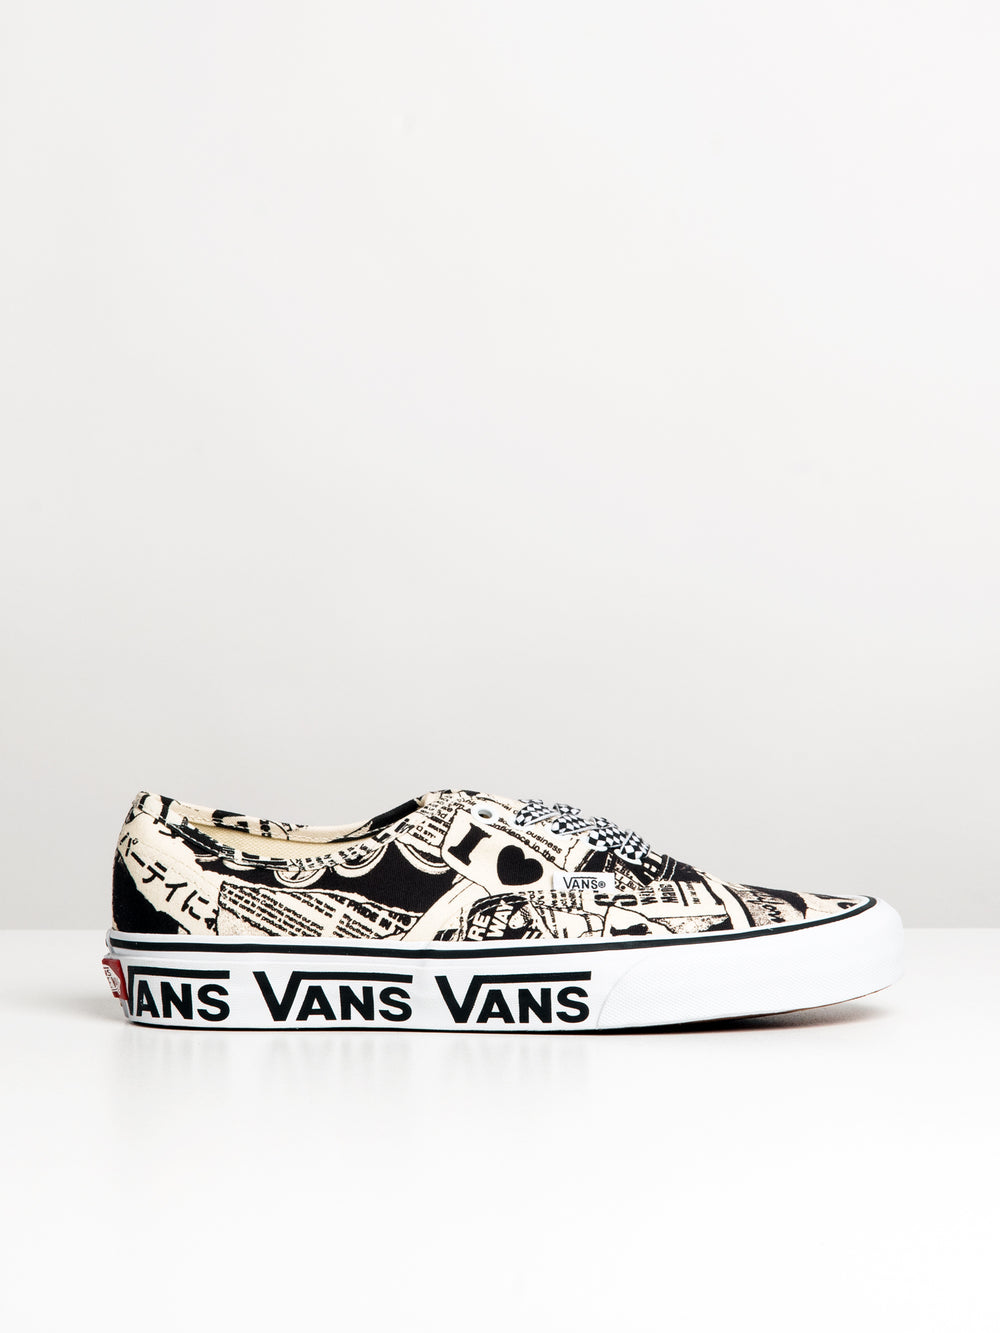 MENS AUTHENTIC - VANS COLLAGE - CLEARANCE